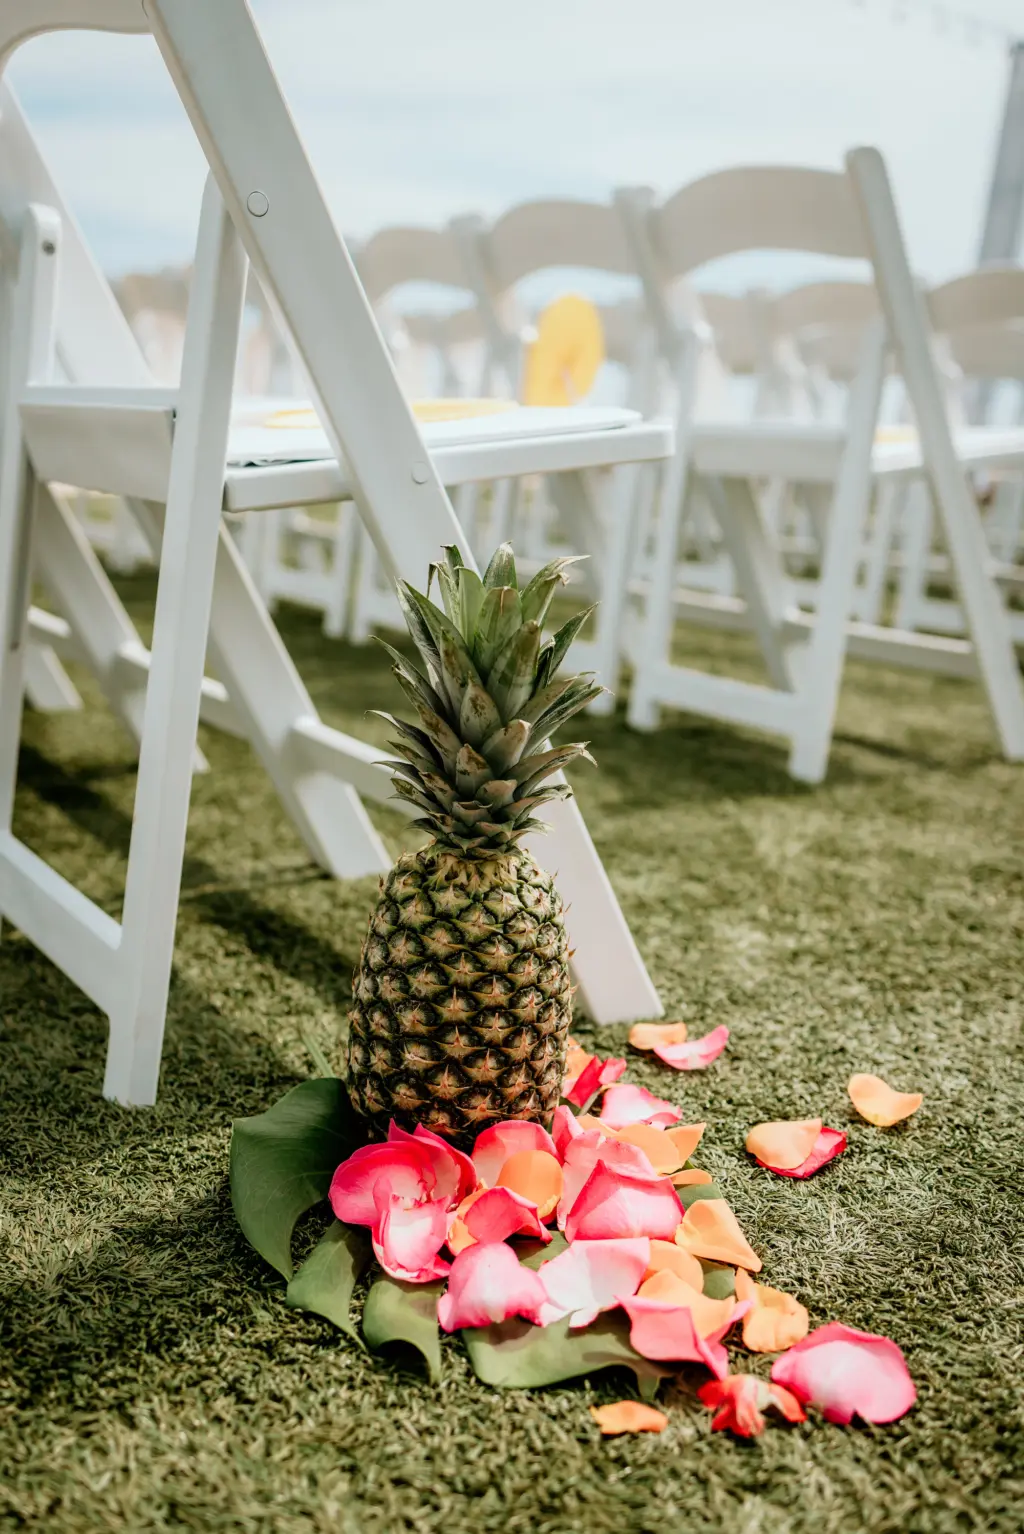 Pineapple and Bright Floral Petal Wedding Aisle Decor with White Folding Chairs | Tropical Outdoor Ceremony Inspiration